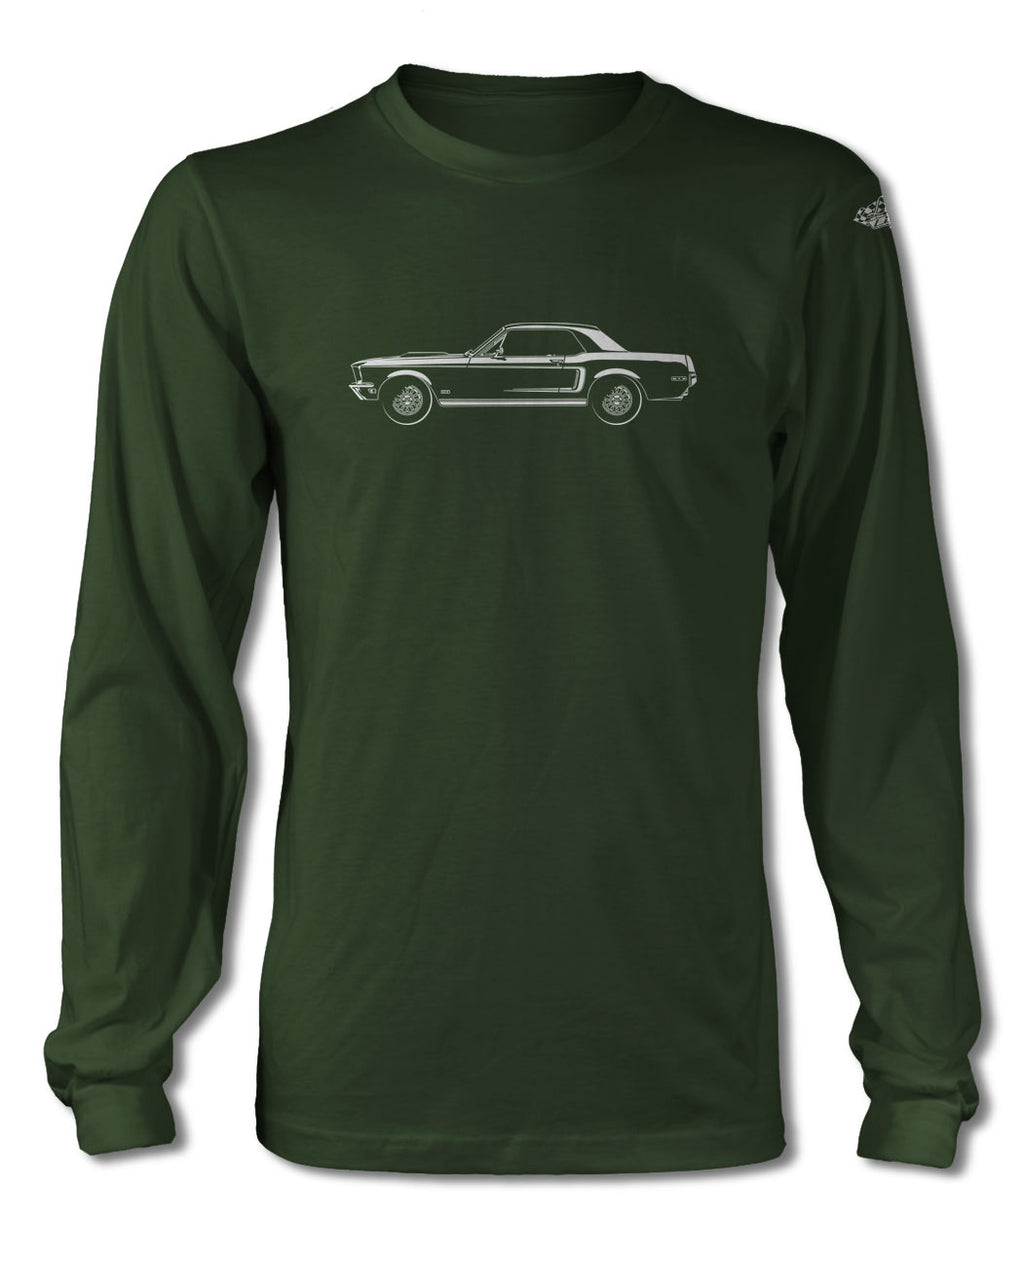 1968 Ford Mustang GT Coupe with Stripes T-Shirt - Long Sleeves - Side View